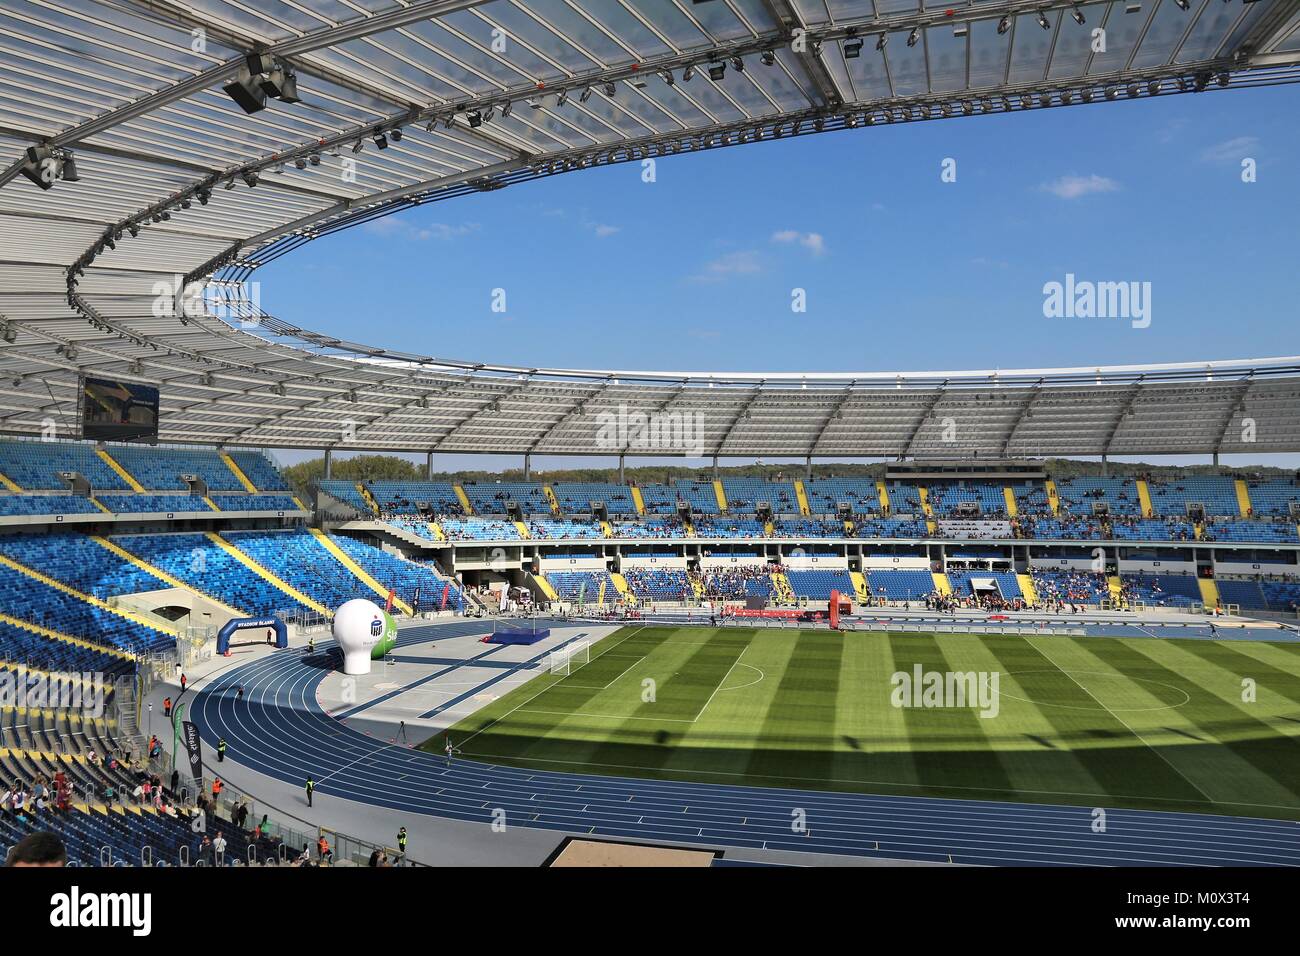 Katowice Poland October 1 2017 Silesian Stadium Stadion Slaski Open Day In Katowice Poland Stadion Slaski Is One Of Biggest Venues In Poland Stock Photo Alamy